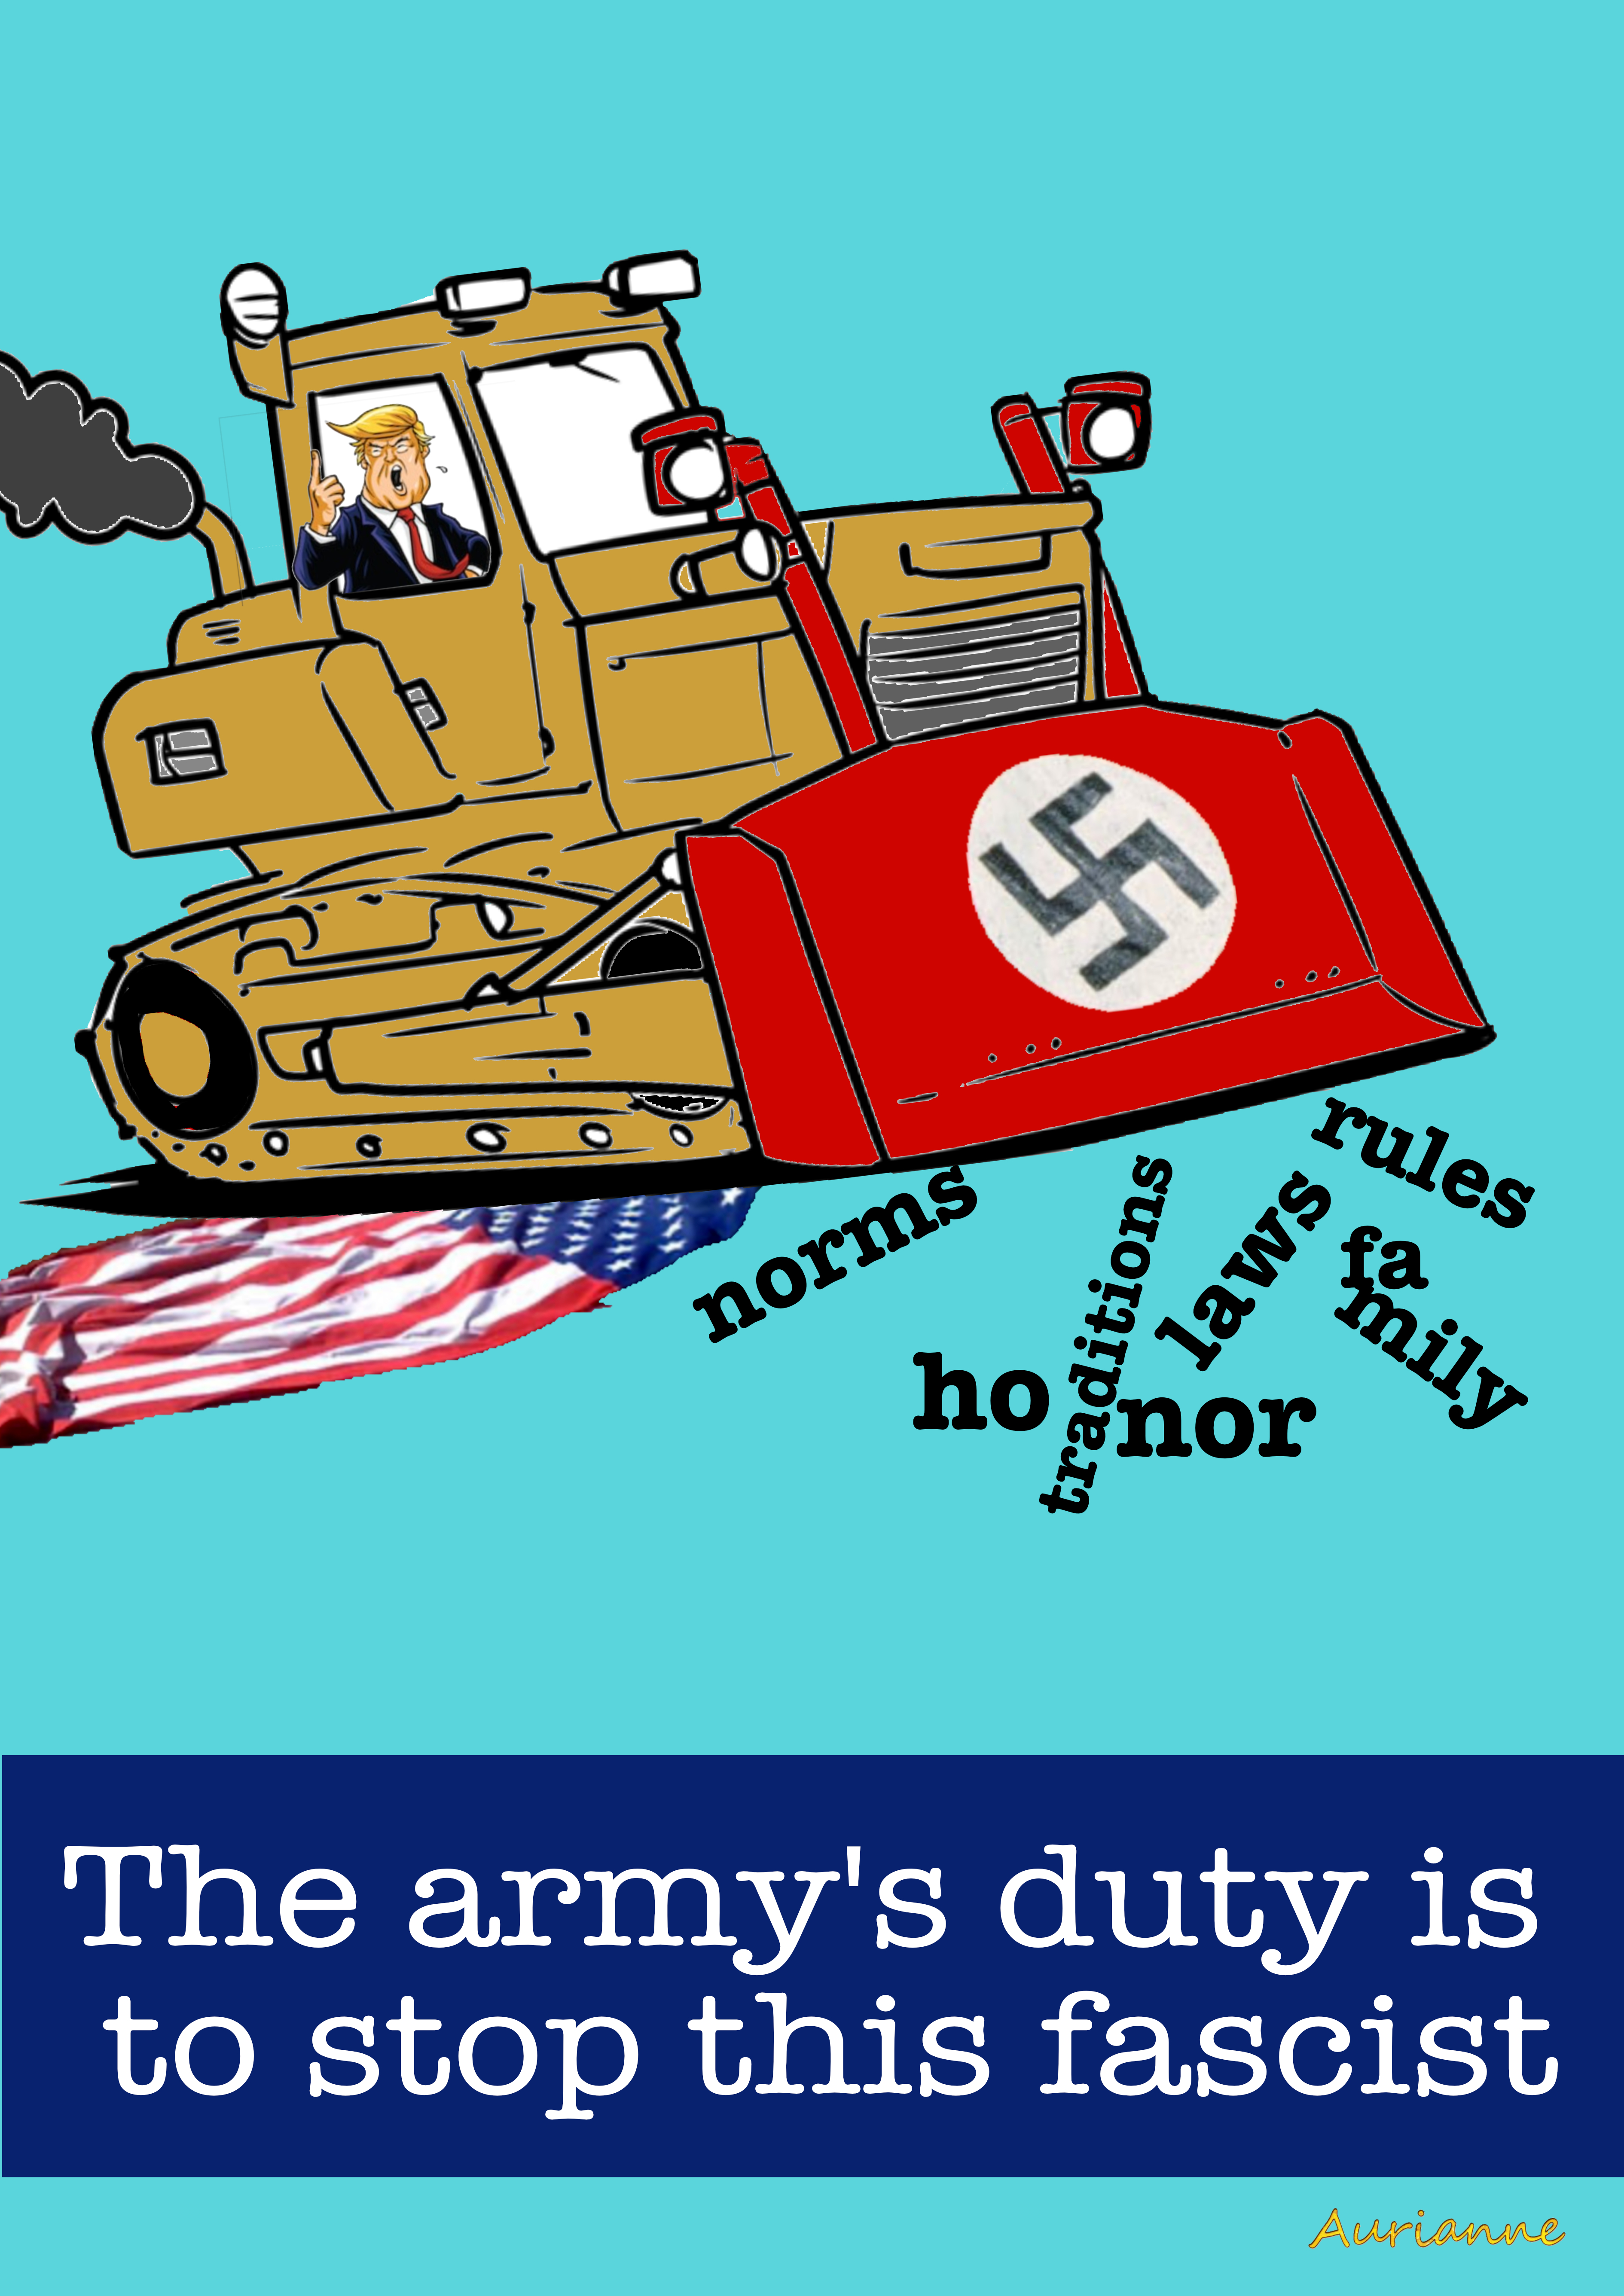 The army’s duty is to stop this fascist